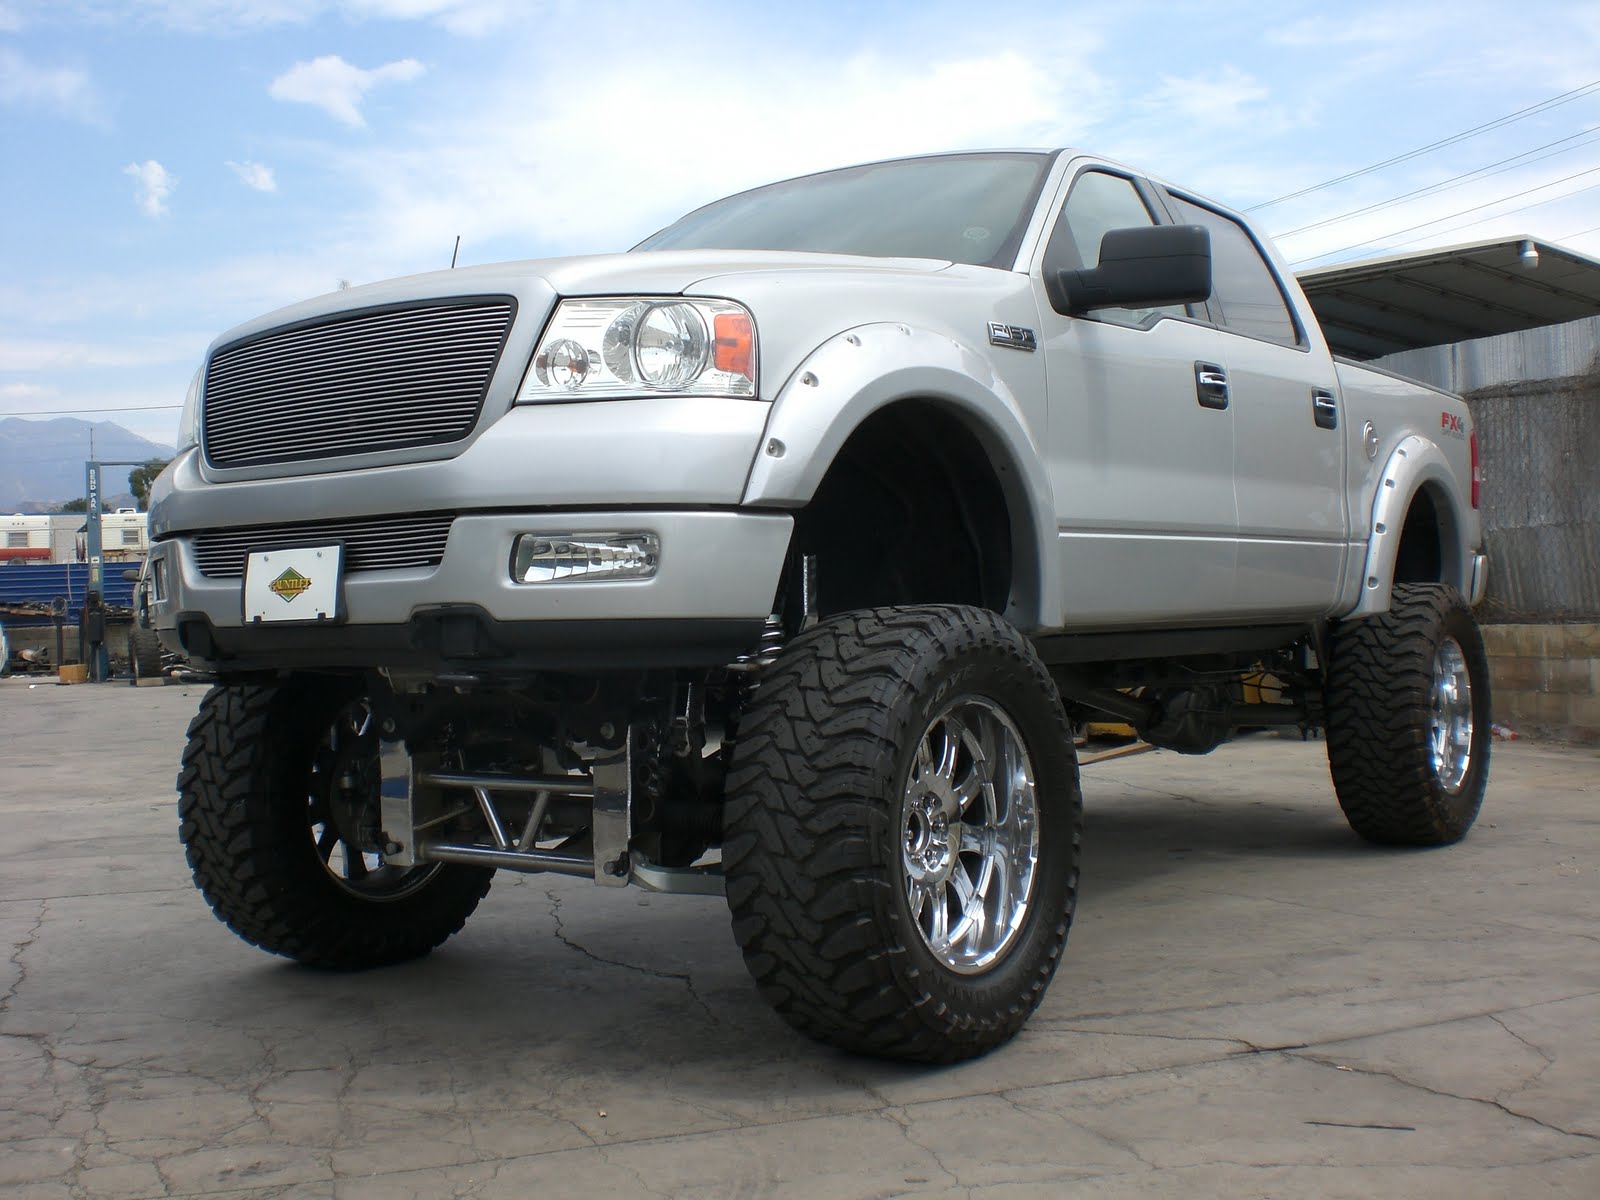 Are You Looking For a Suspension Lift Kit For Your Ford F150? 